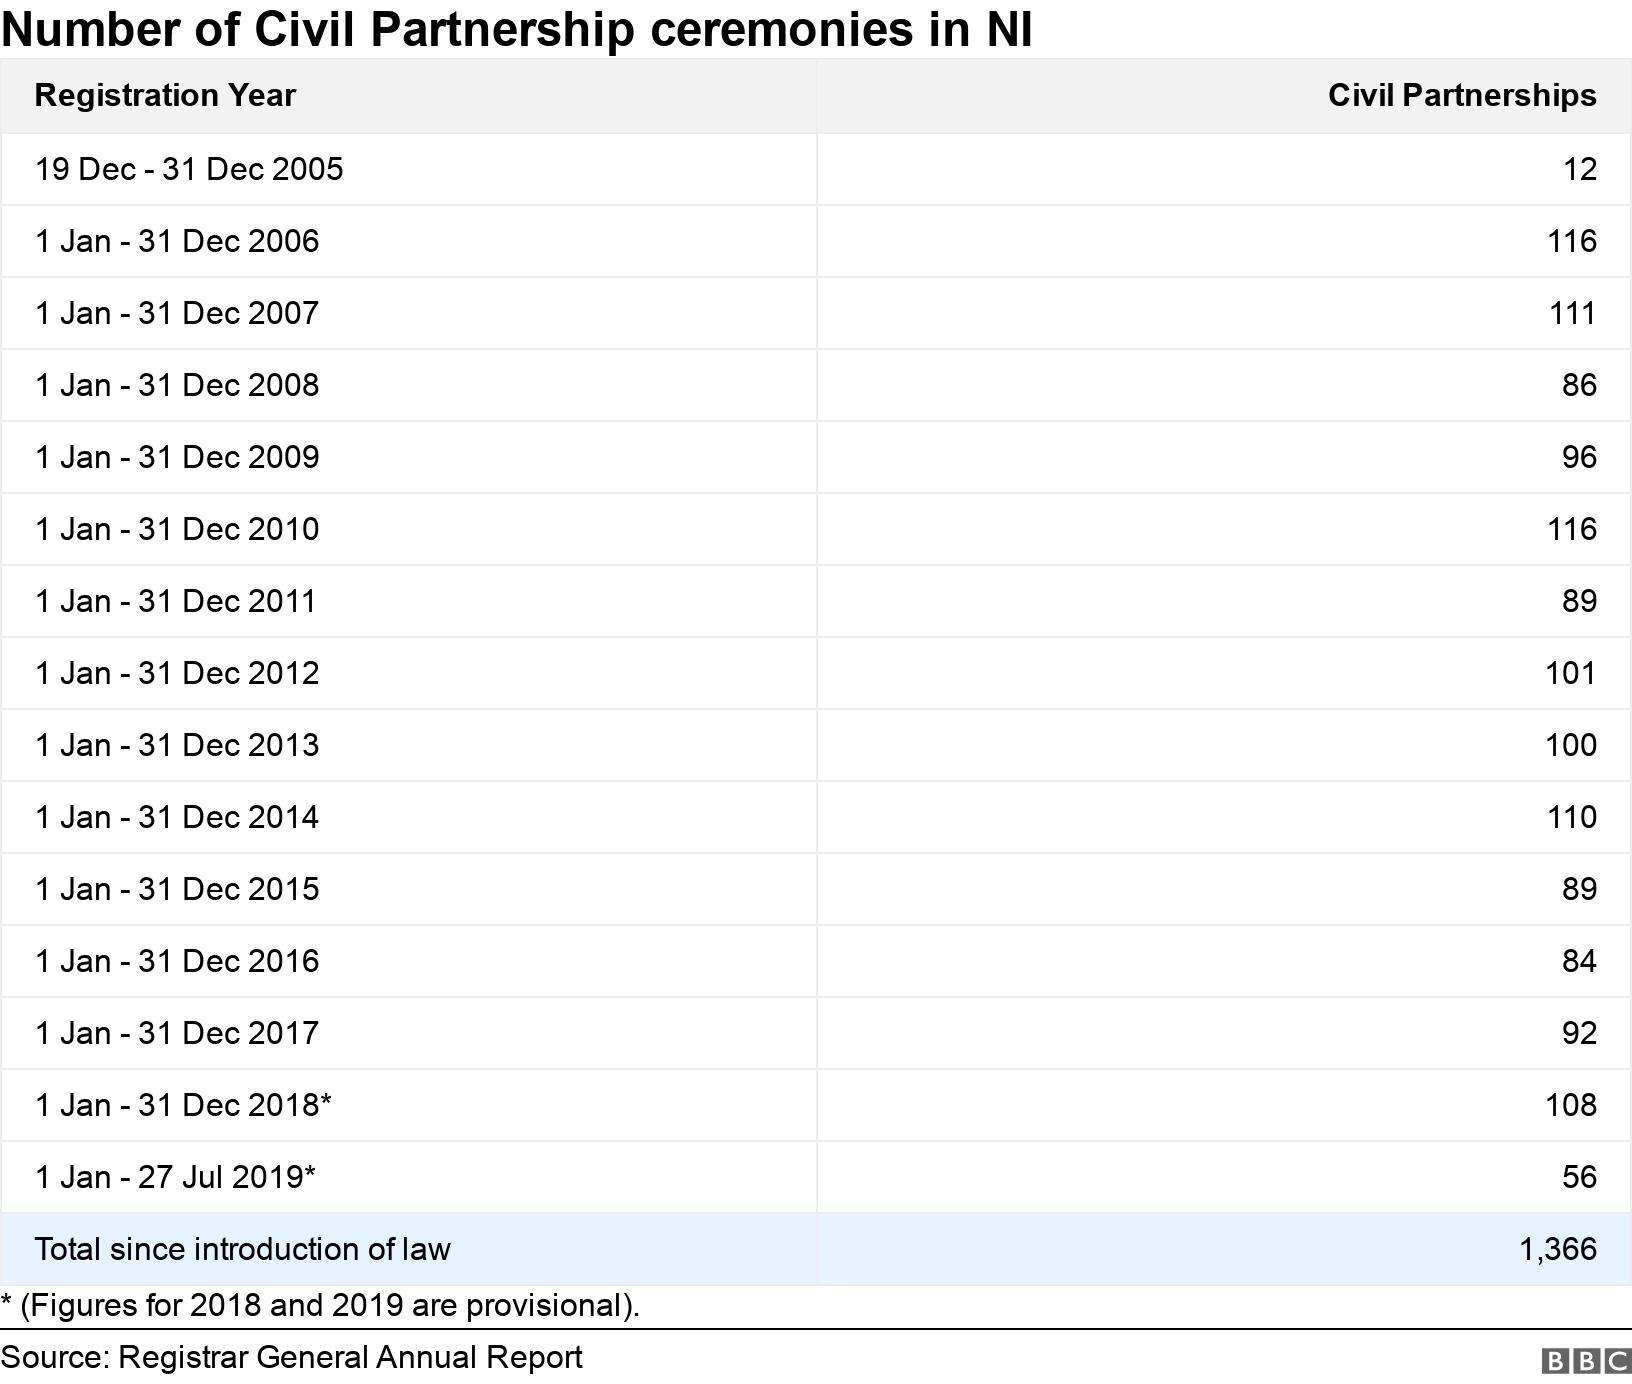 Number of Civil Partnership ceremonies in NI. .  * (Figures for 2018 and 2019 are provisional)..